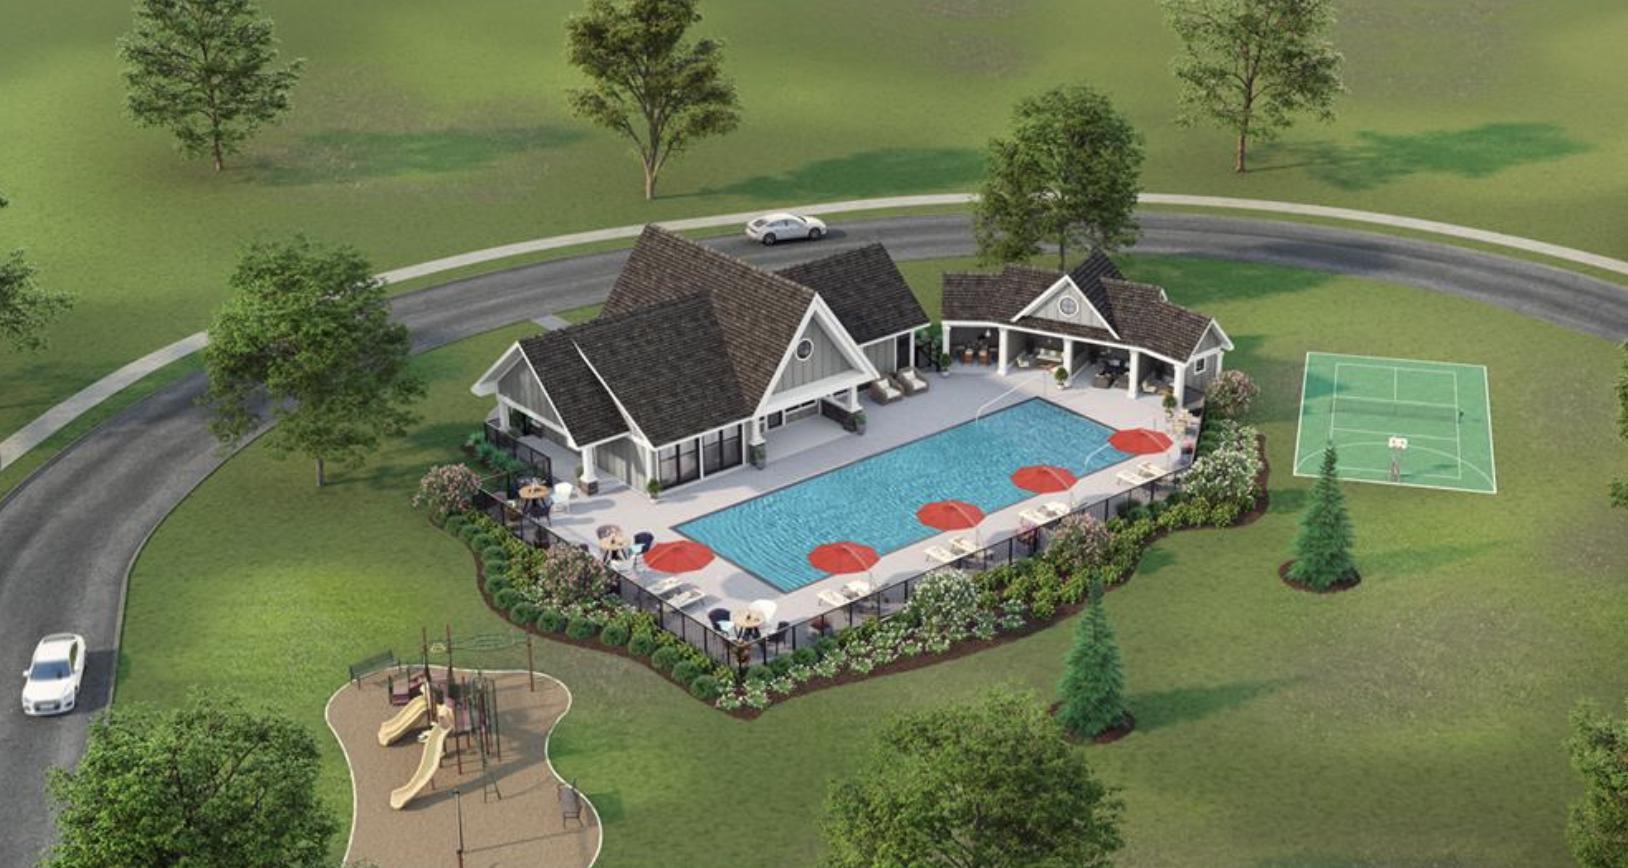 3d-exterior-aerial-view-rendering-house-with-swimming-pool-minneapolis-minnesota